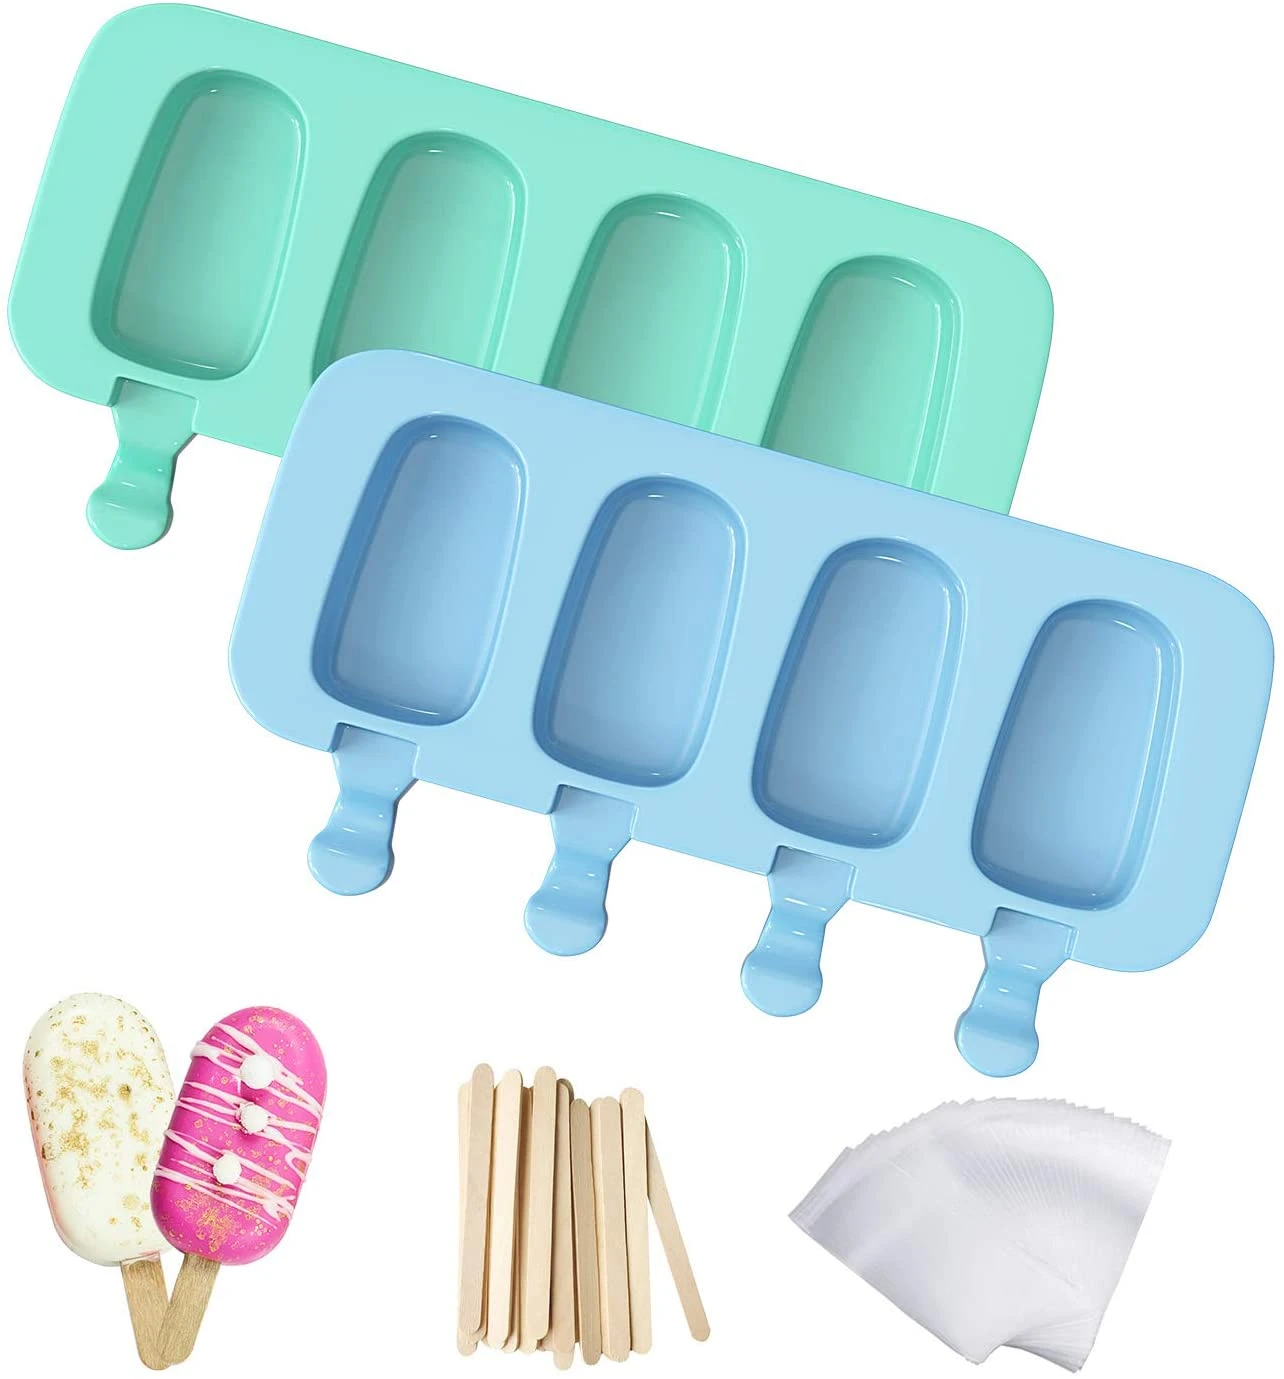 4 Cavities Silicone Ice Cube Molds Popsicle Mold with 50 Wooden Sticks  and 50 Popsicle Bags